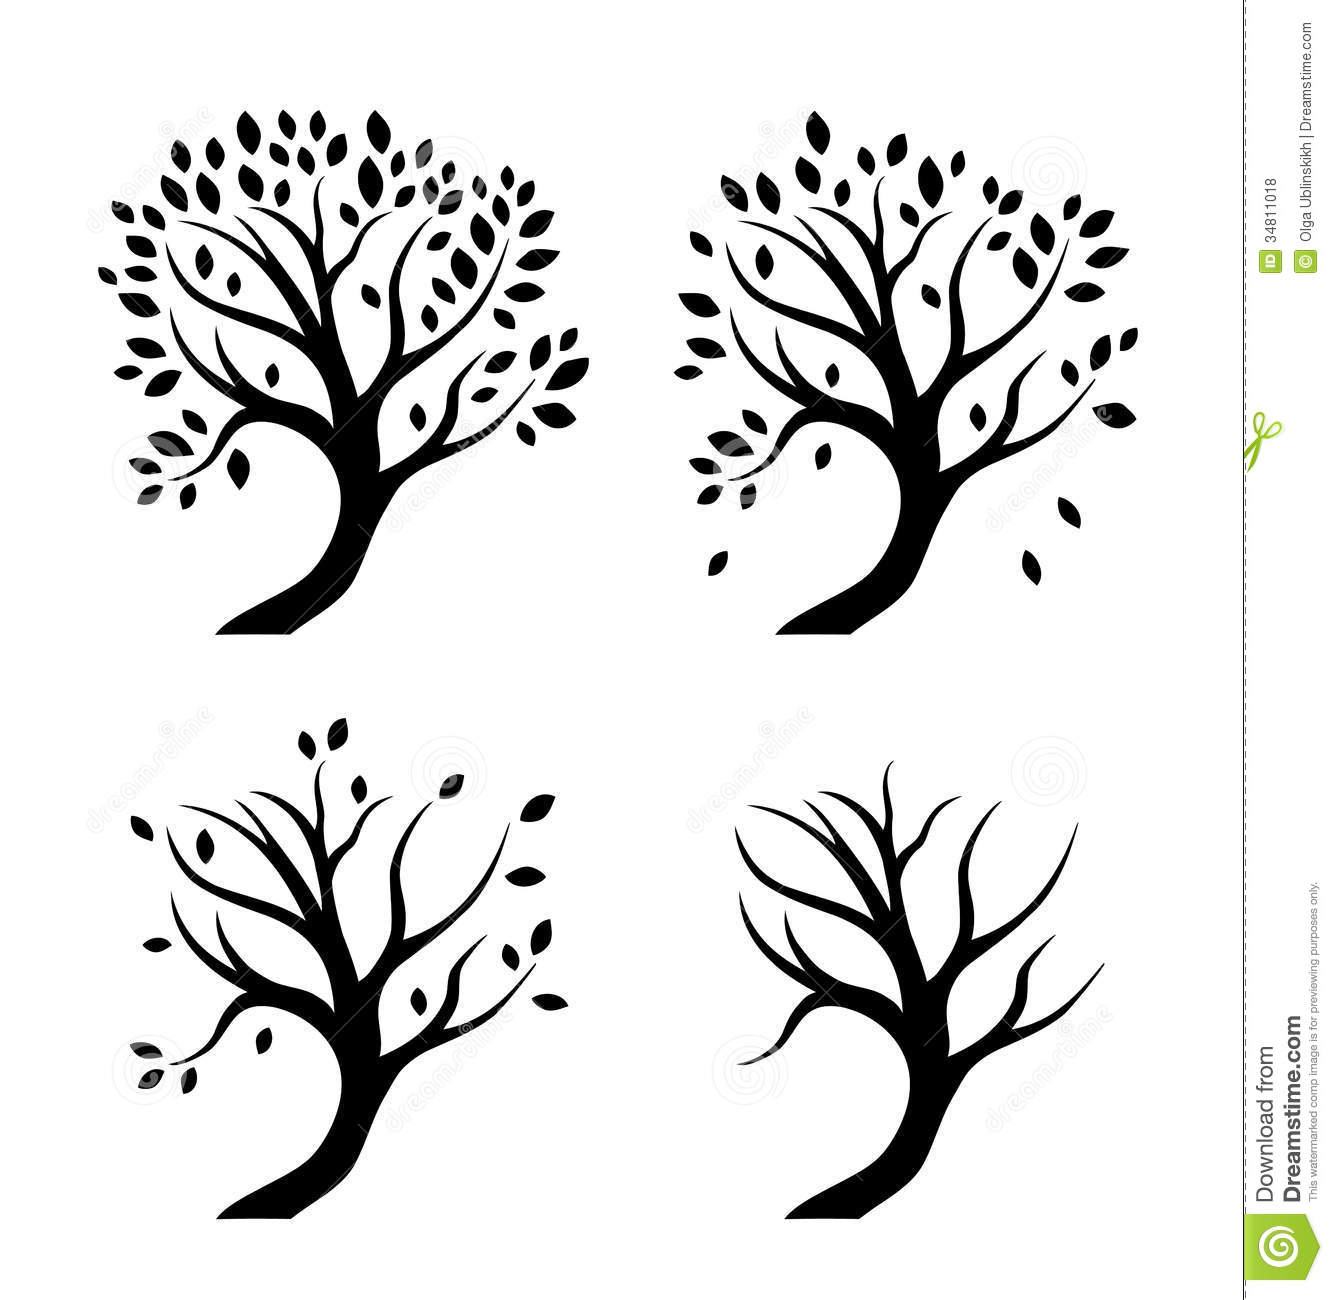 Vector Silhouettes Of Trees In Seasons Royalty Free Stock Photos